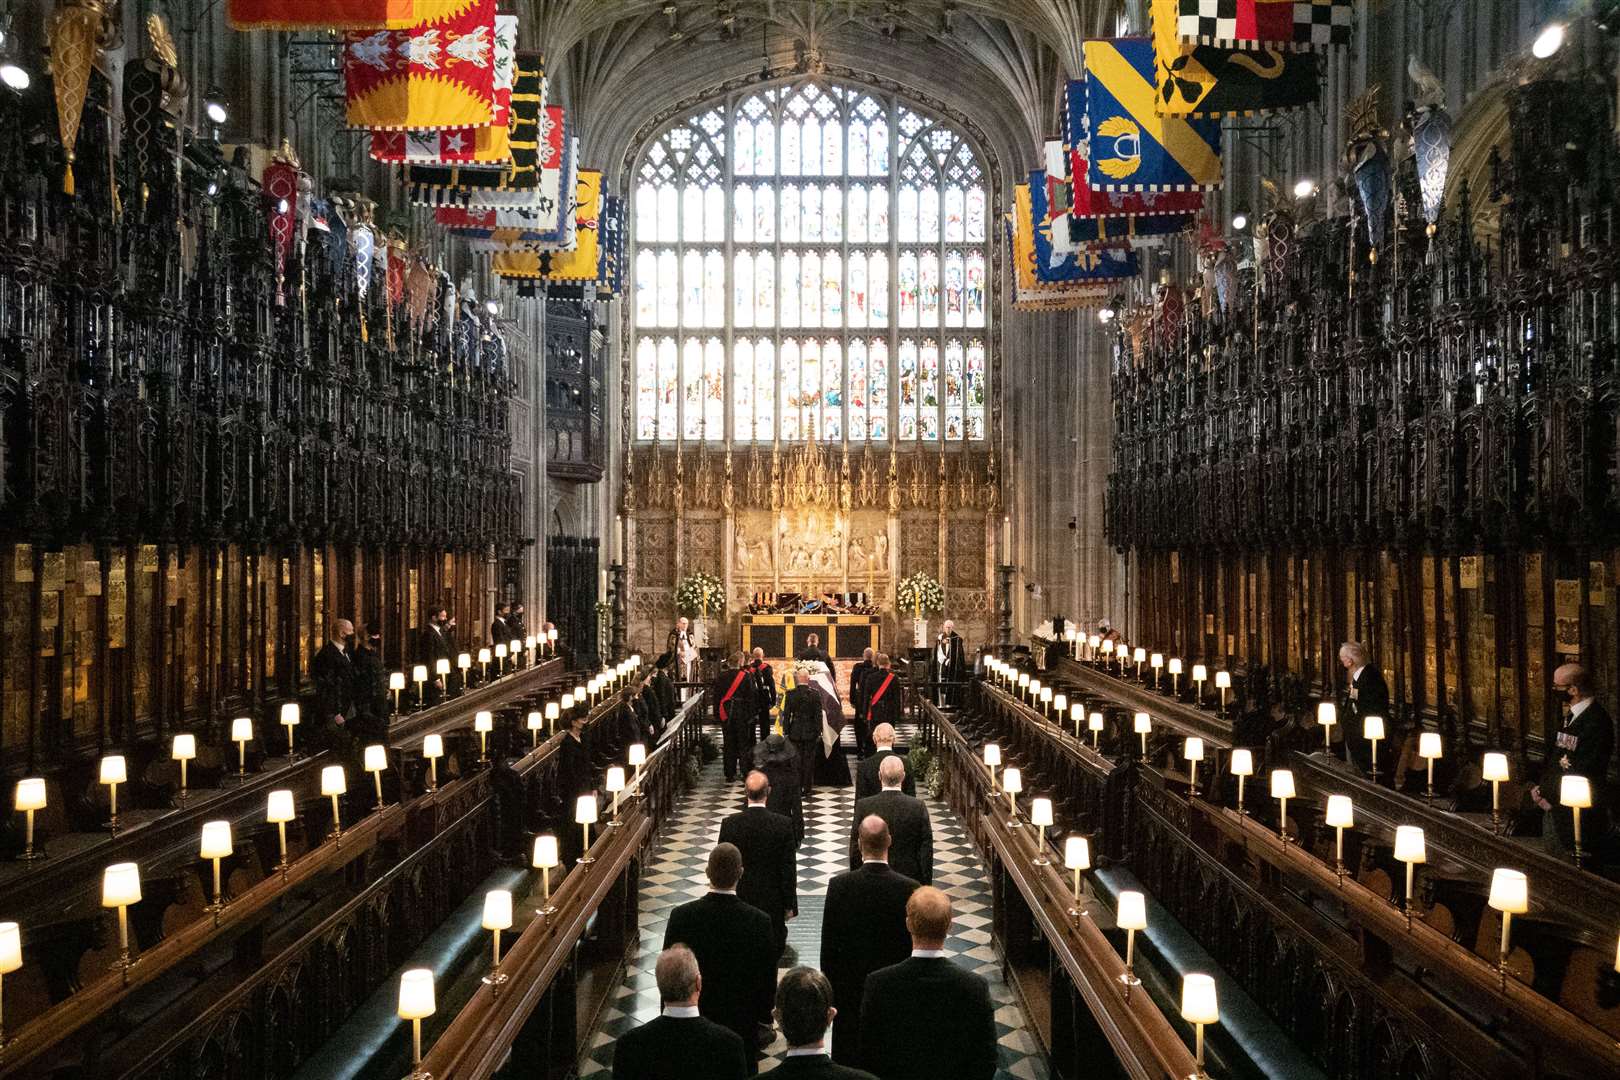 The funeral service at St George’s Chapel, Windsor Castle (Barnaby Fowler/PA)